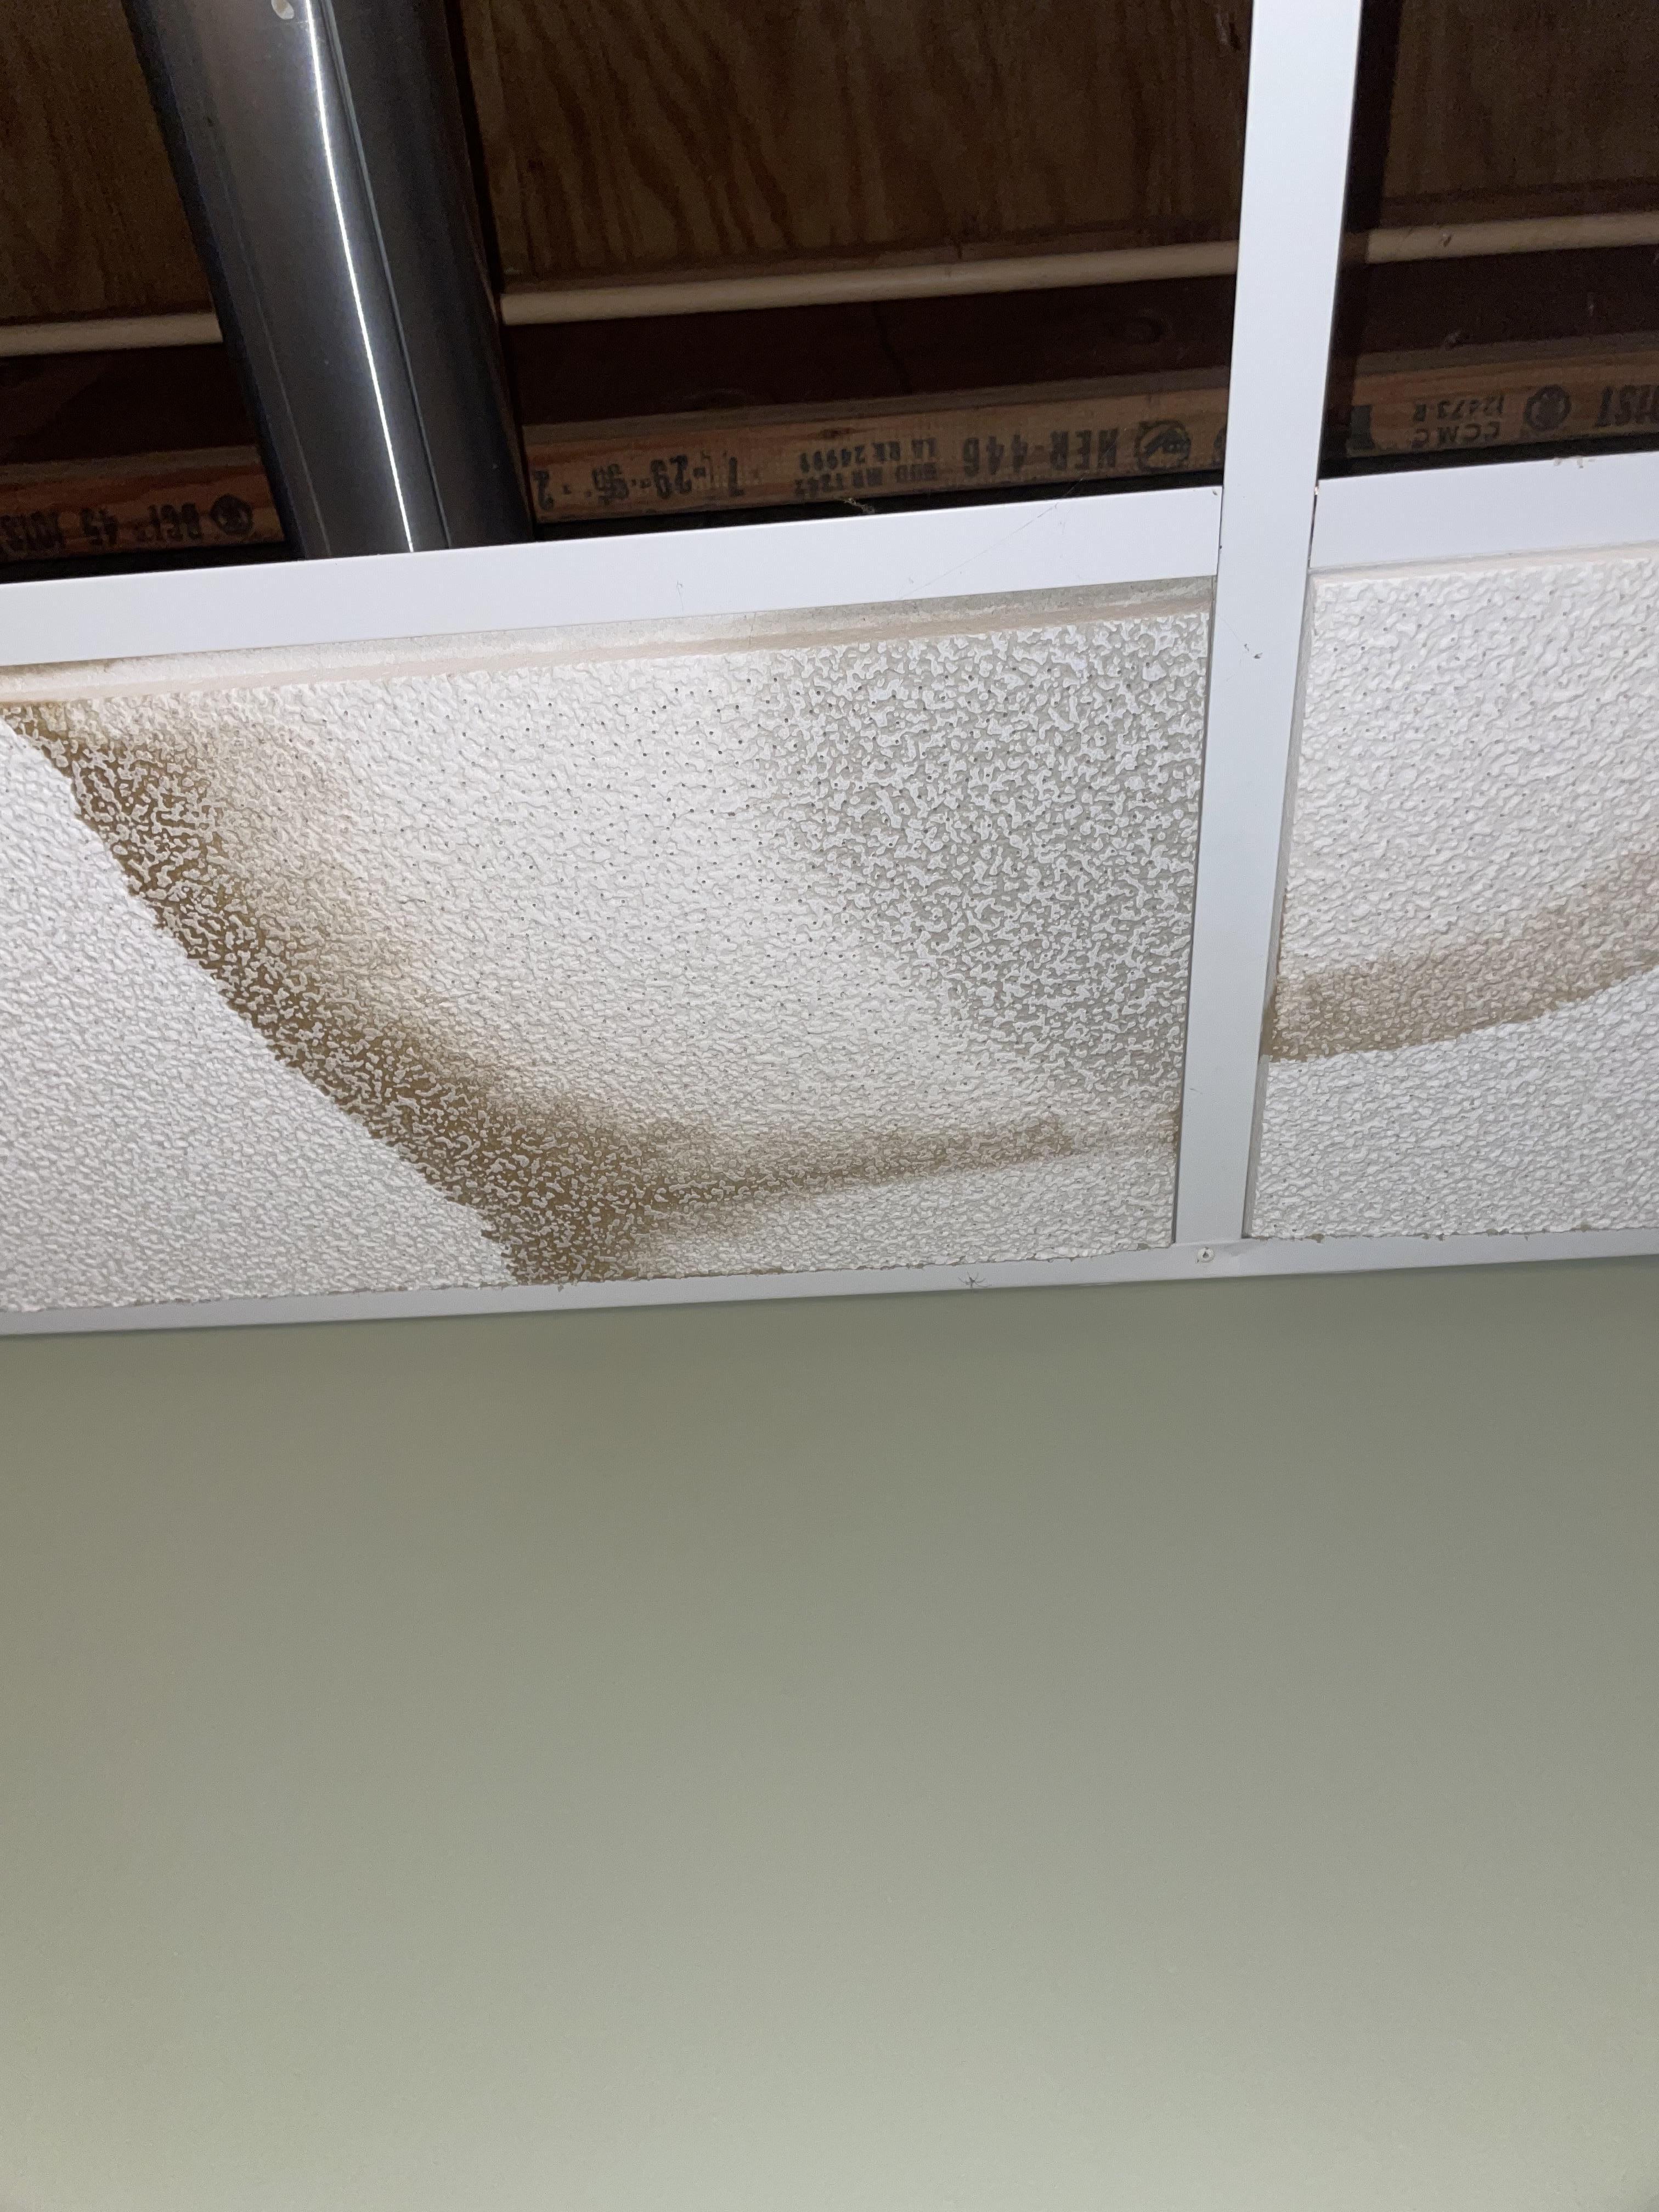 Water damage to ceiling downstairs